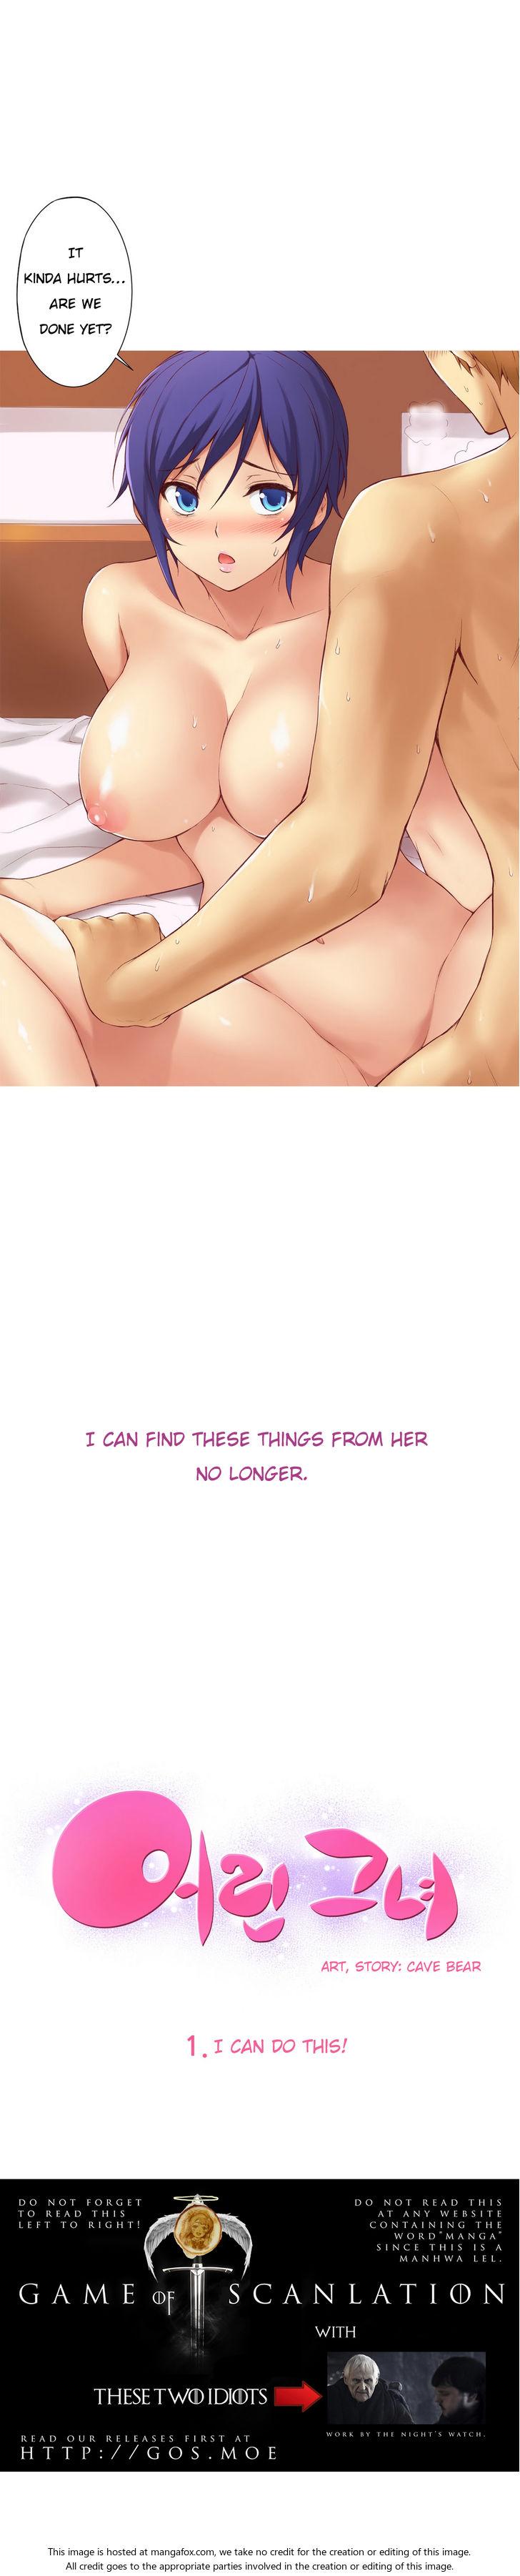 Suckingcock [Donggul Gom] She is Young (English) Part 1/2 Price - Page 6